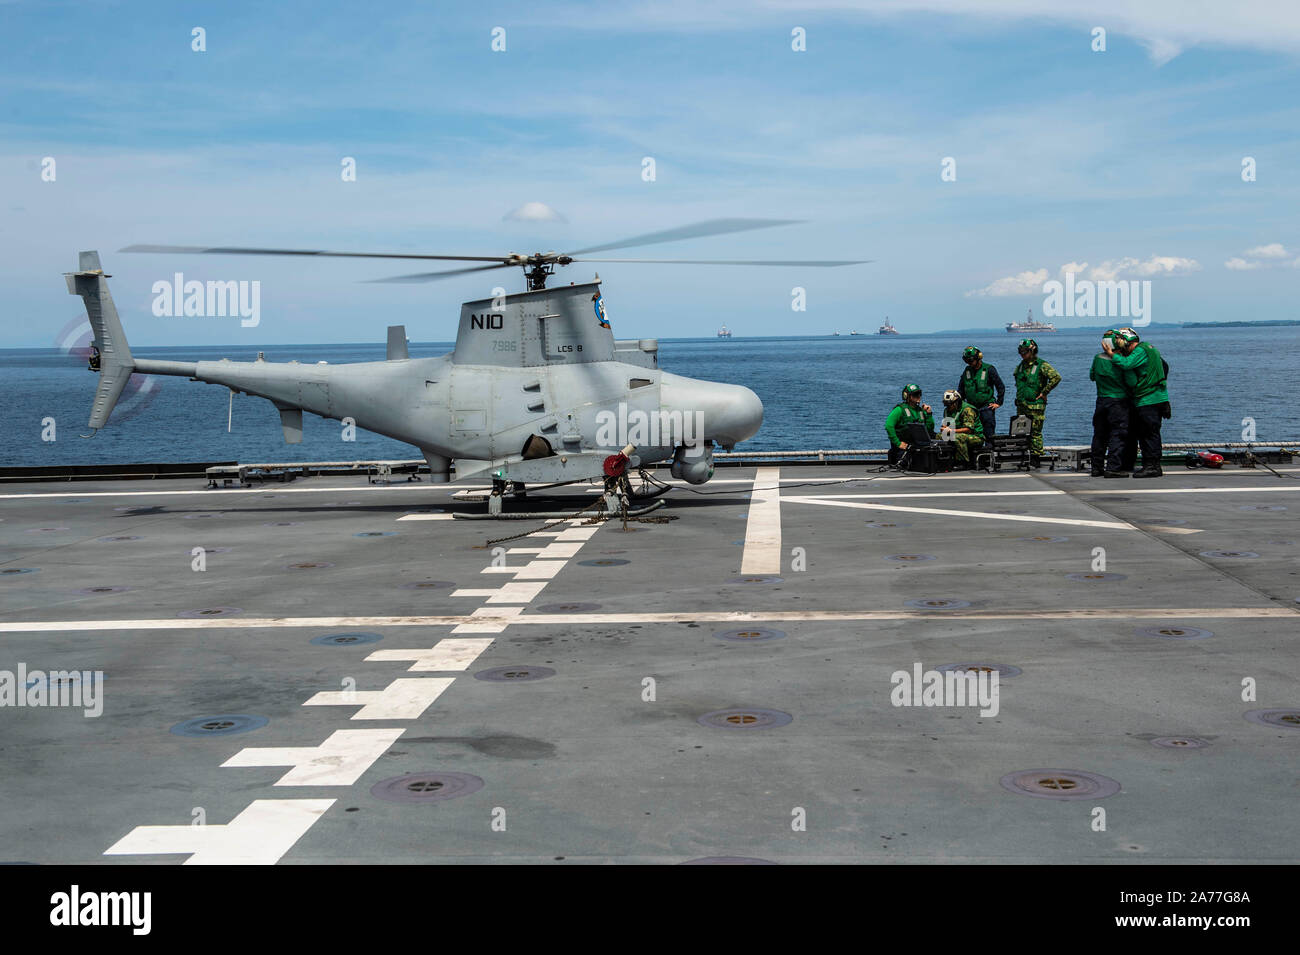 191030-N-FV739-0876  SOUTH CHINA SEA (Oct. 30, 2019) U.S. Navy Sailors demonstrate unmanned aerial vehicle MQ-8B Firescout capabilities and configurations with Royal Brunei Armed Forces aboard the Independence-variant littoral combat ship USS Montgomery (LCS 8) during Cooperation Afloat Readiness and Training (CARAT) Brunei. This year marks the 25th iteration of CARAT, a multinational exercise designed to enhance U.S. and partner navies' abilities to operate together in response to traditional and non-traditional maritime security challenges in the Indo-Pacific region. (U.S. Navy photo by Mass Stock Photo